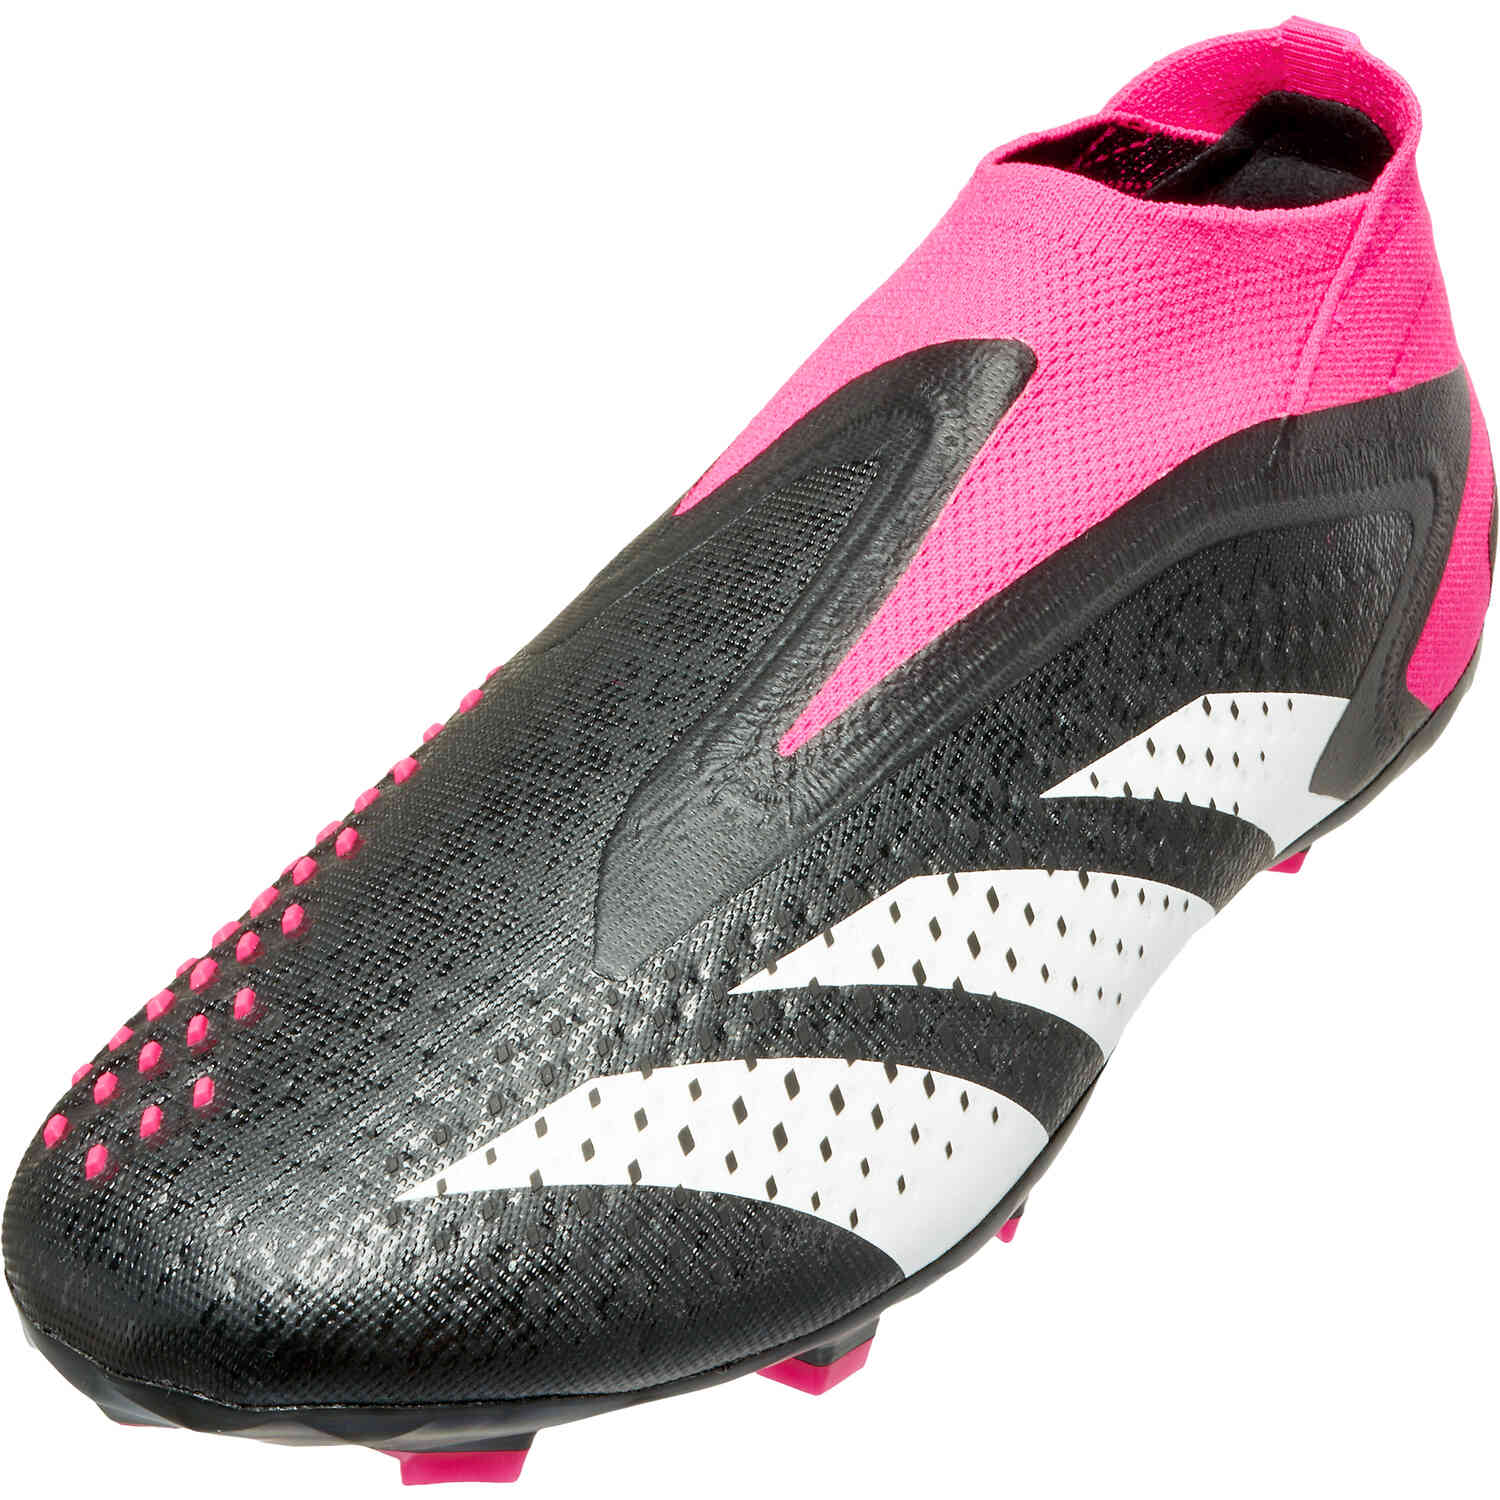 adidas Predator ACCURACY.4 Youth TF Soccer Shoes - Core Black/White/Shock  Pink